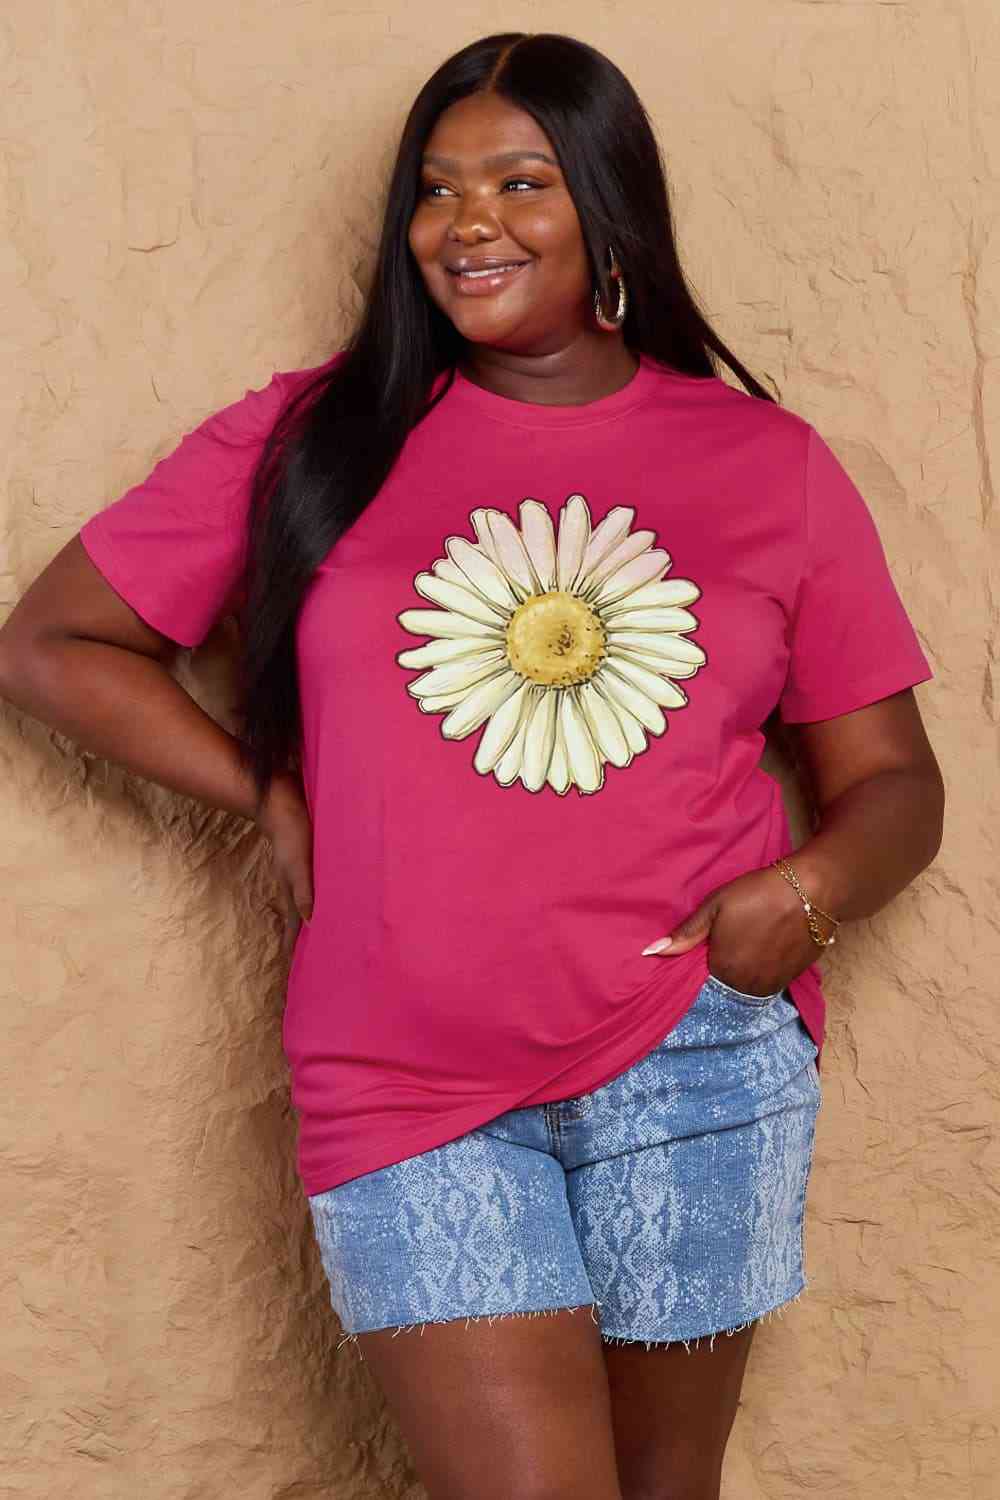 FLOWER Graphic Cotton Tee up to 3XL